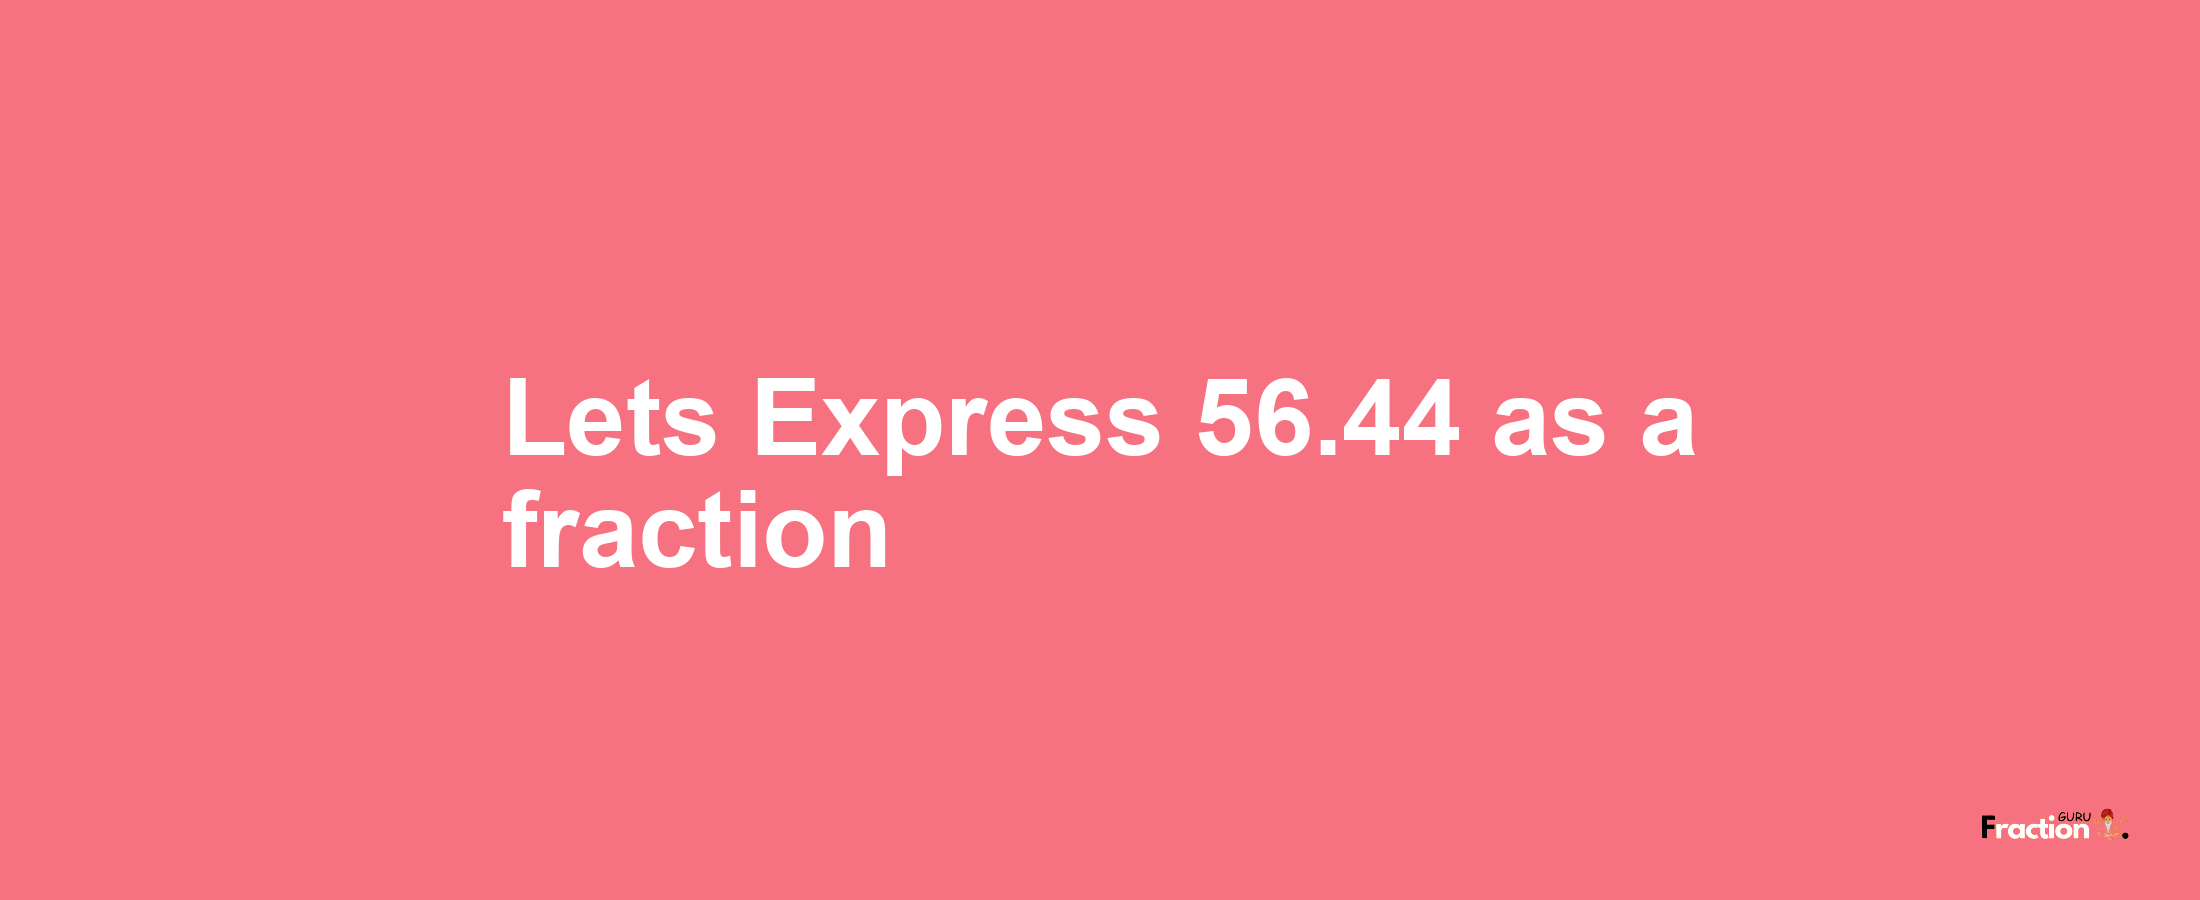 Lets Express 56.44 as afraction